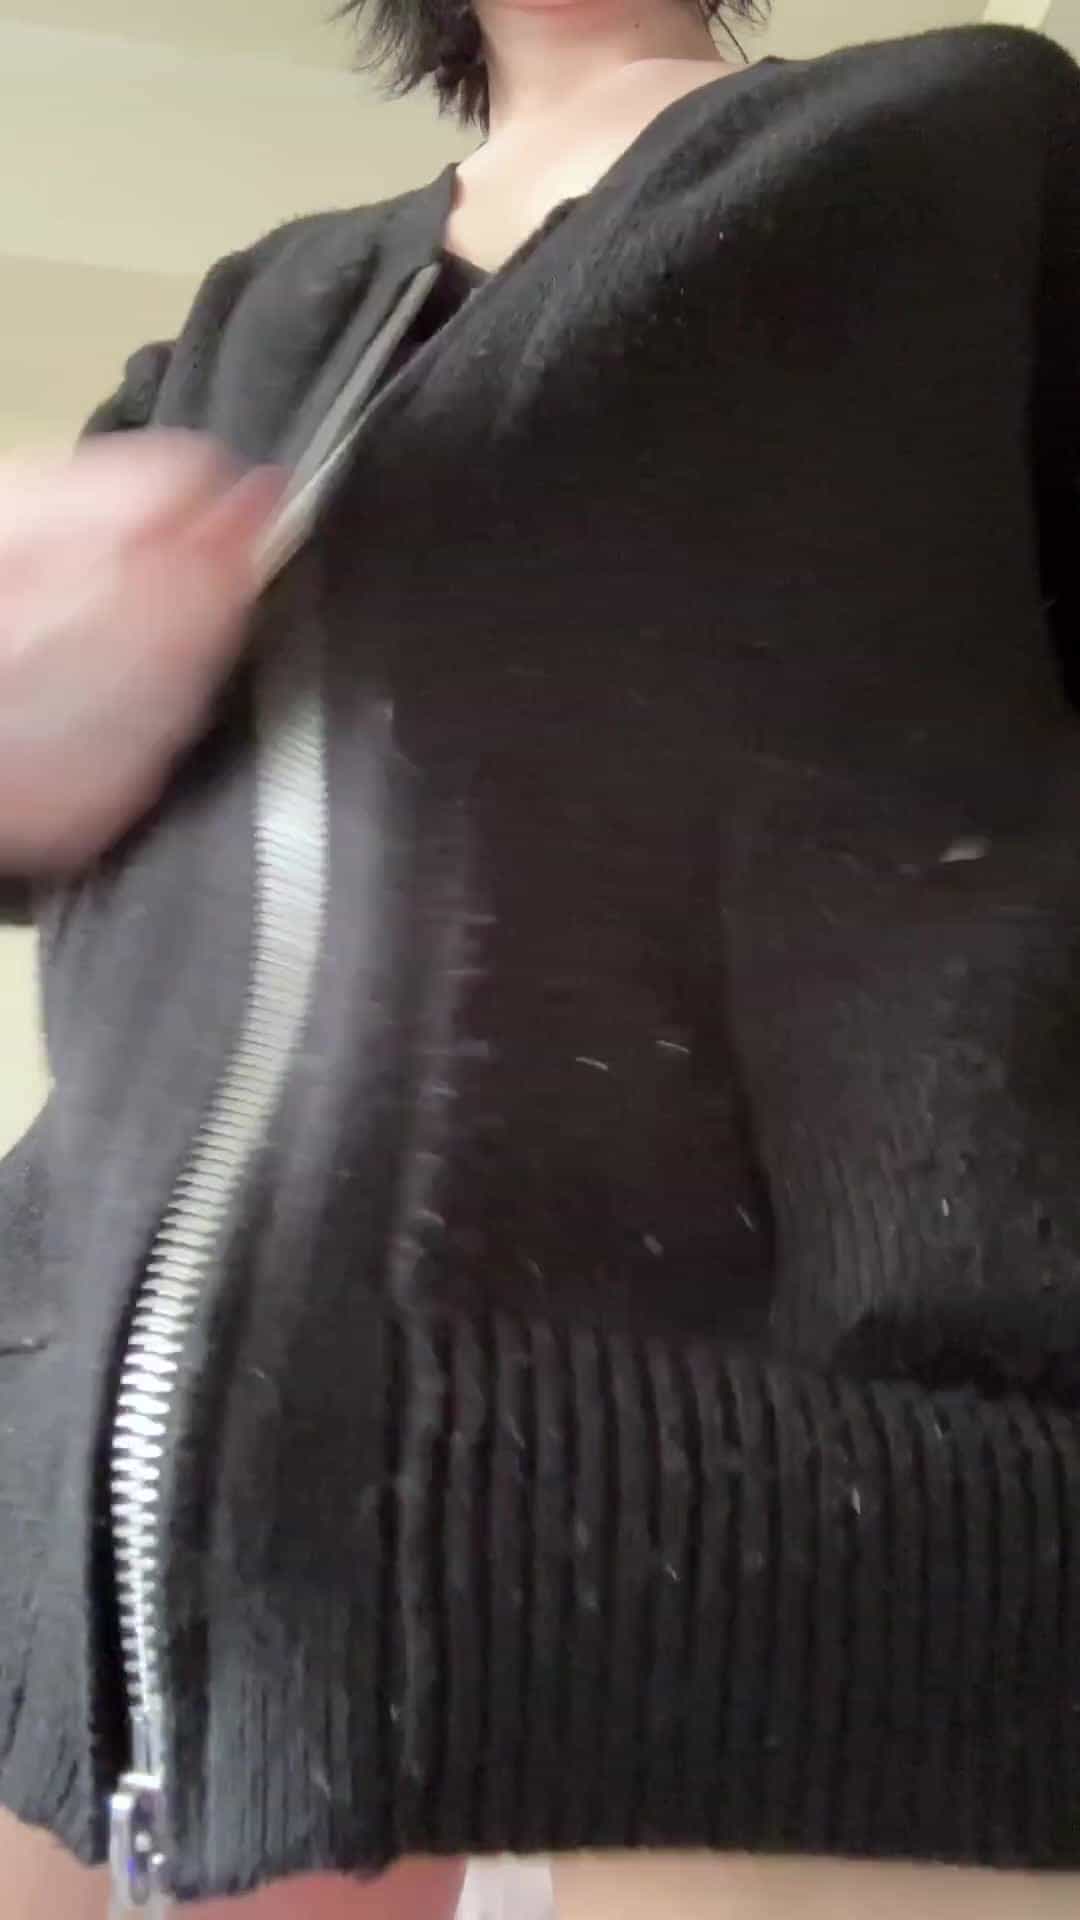 What would you do if I unzipped my hoodie and you saw my huge cock?